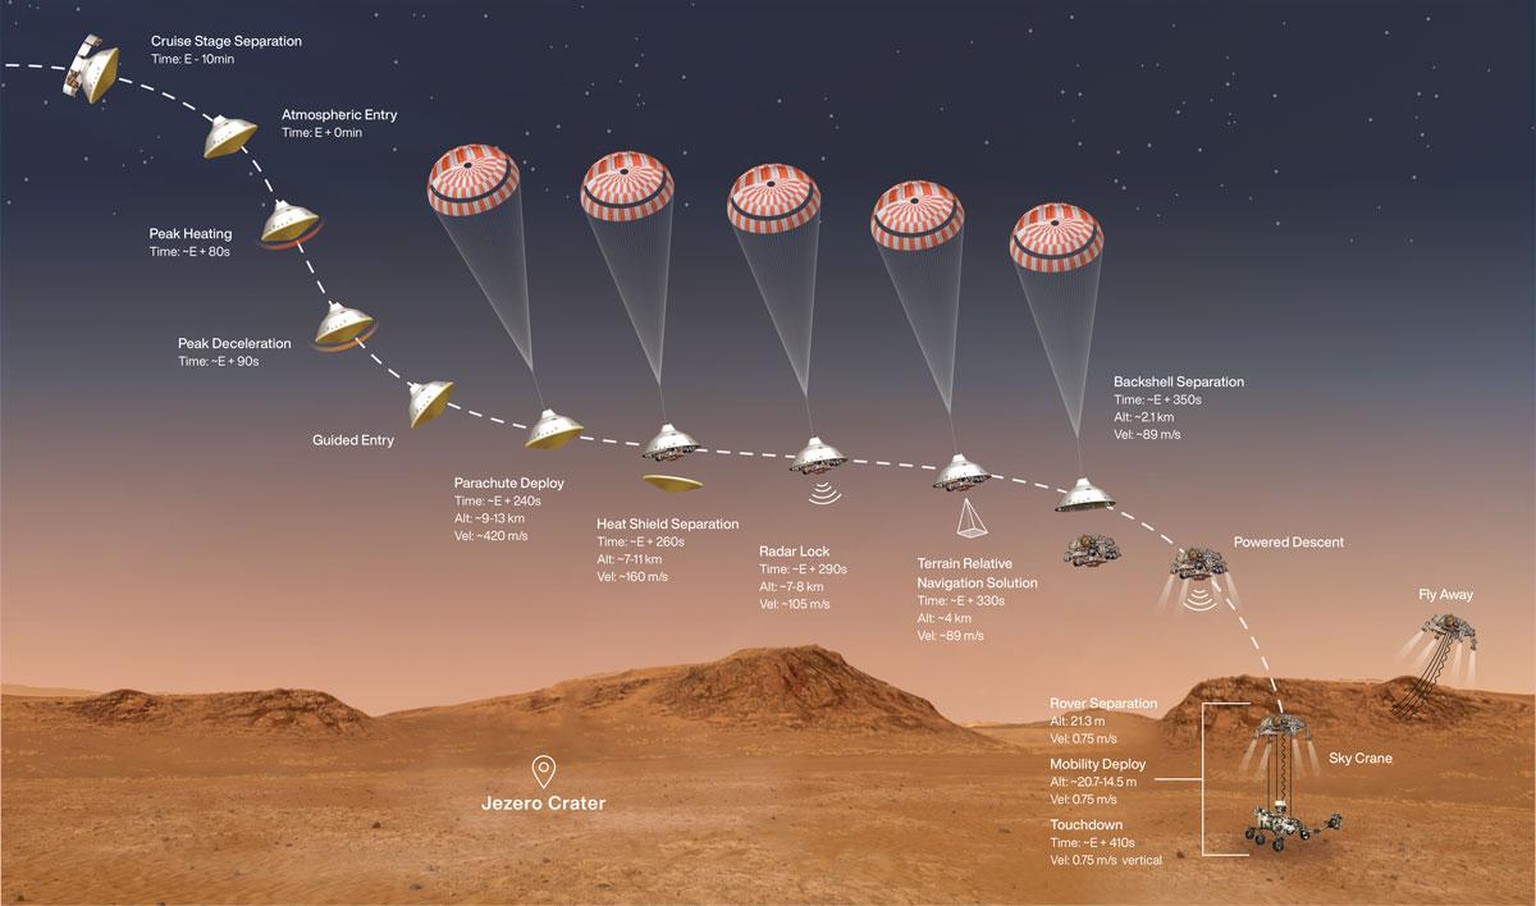 This illustration shows the events that occur in the final minutes of the nearly seven-month journey that NASA’s Perseverance rover takes to Mars. 
https://mars.nasa.gov/internal_resources/961/